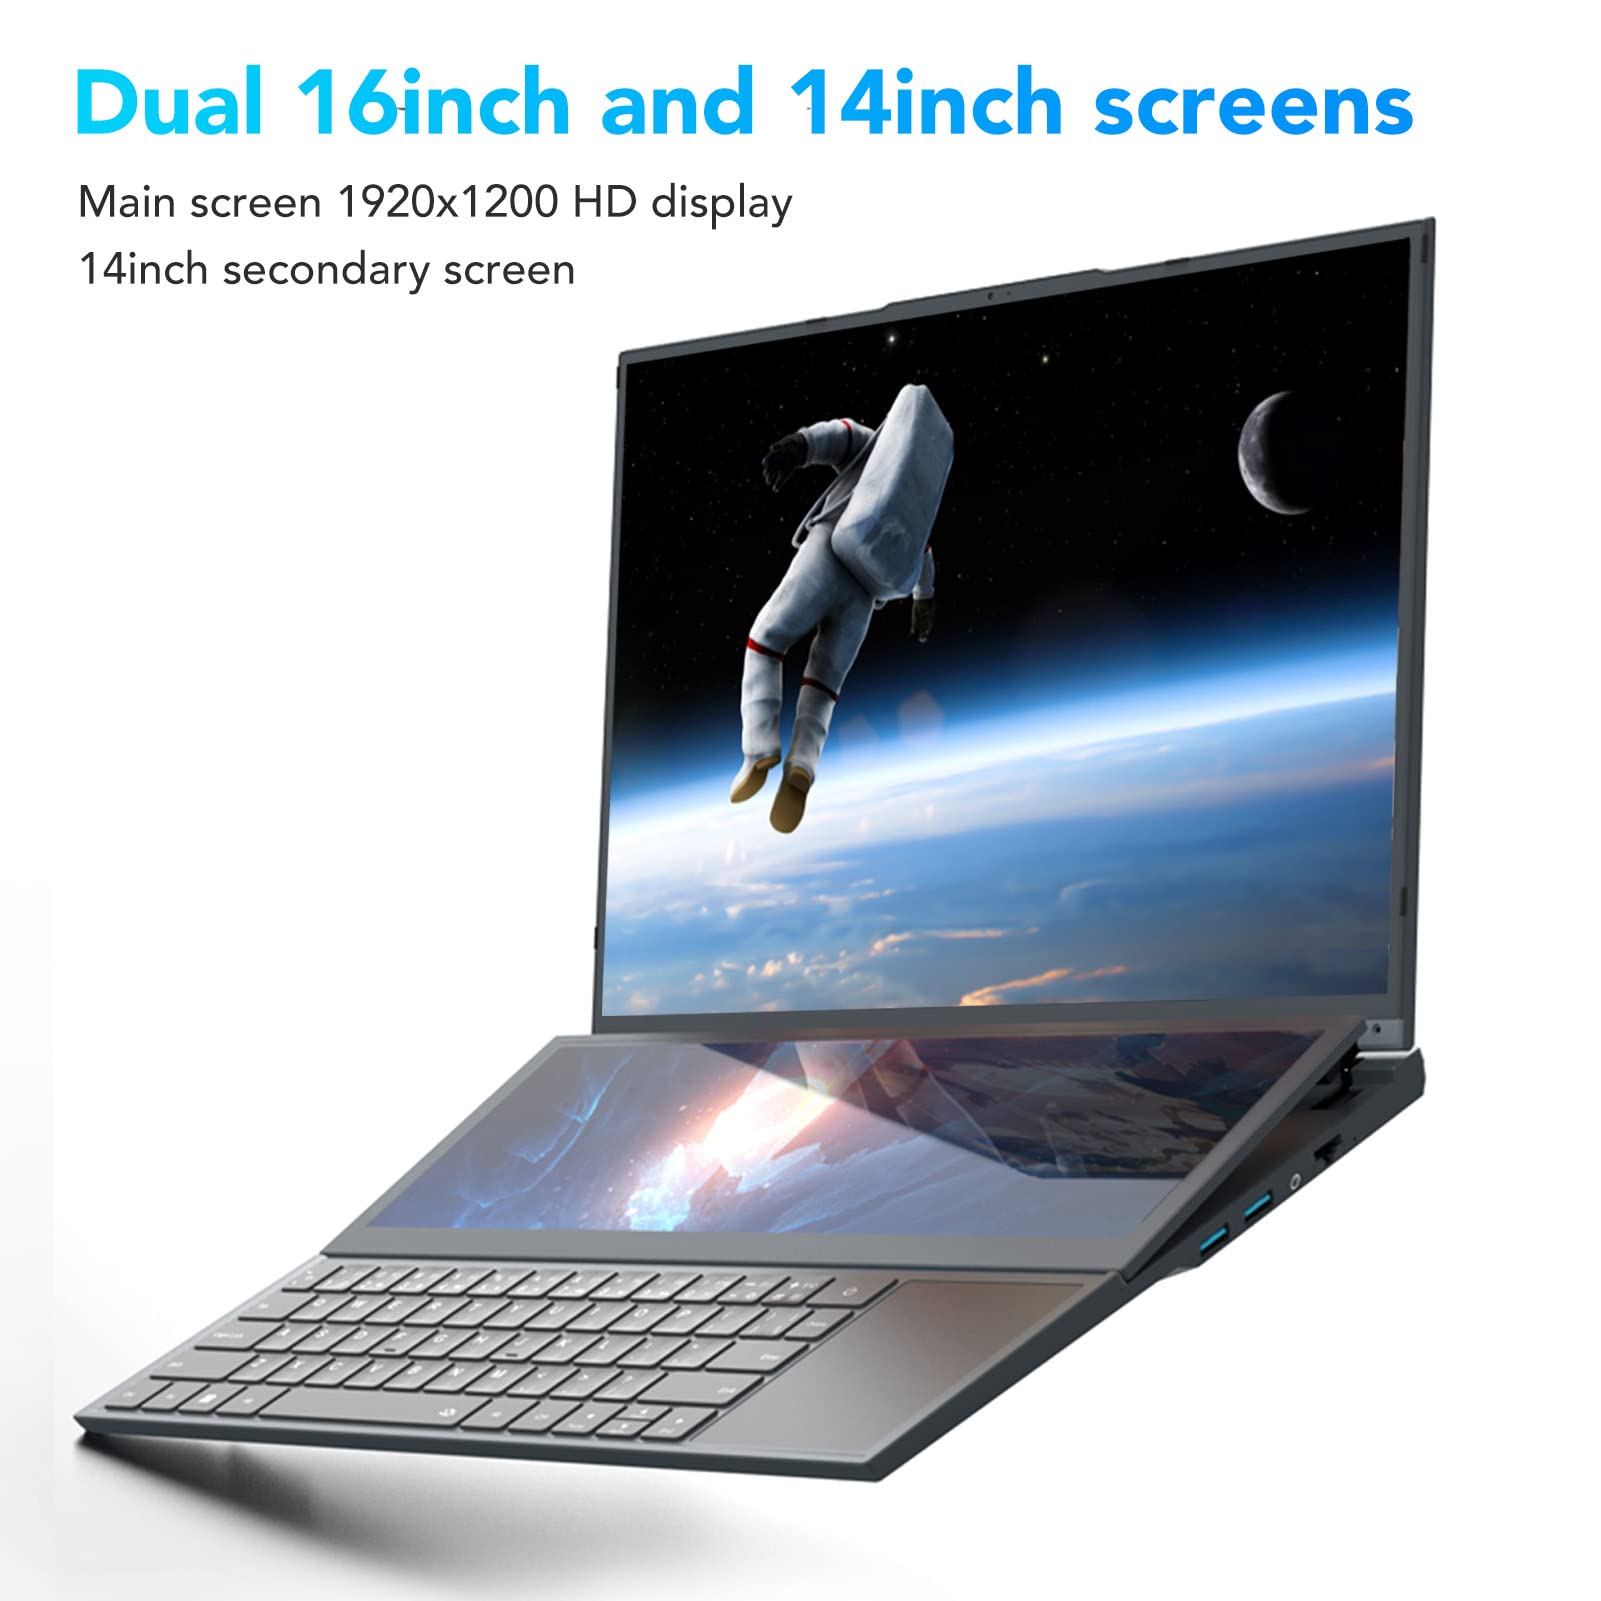 Zopsc Dual Screen Laptop, 16 Inch HD Main Screen+14 Inch Touch Sub Screen with 64GB ROM and 16GB RAM, for Intel for Core i7, for Windows 10 11 (US Plug)